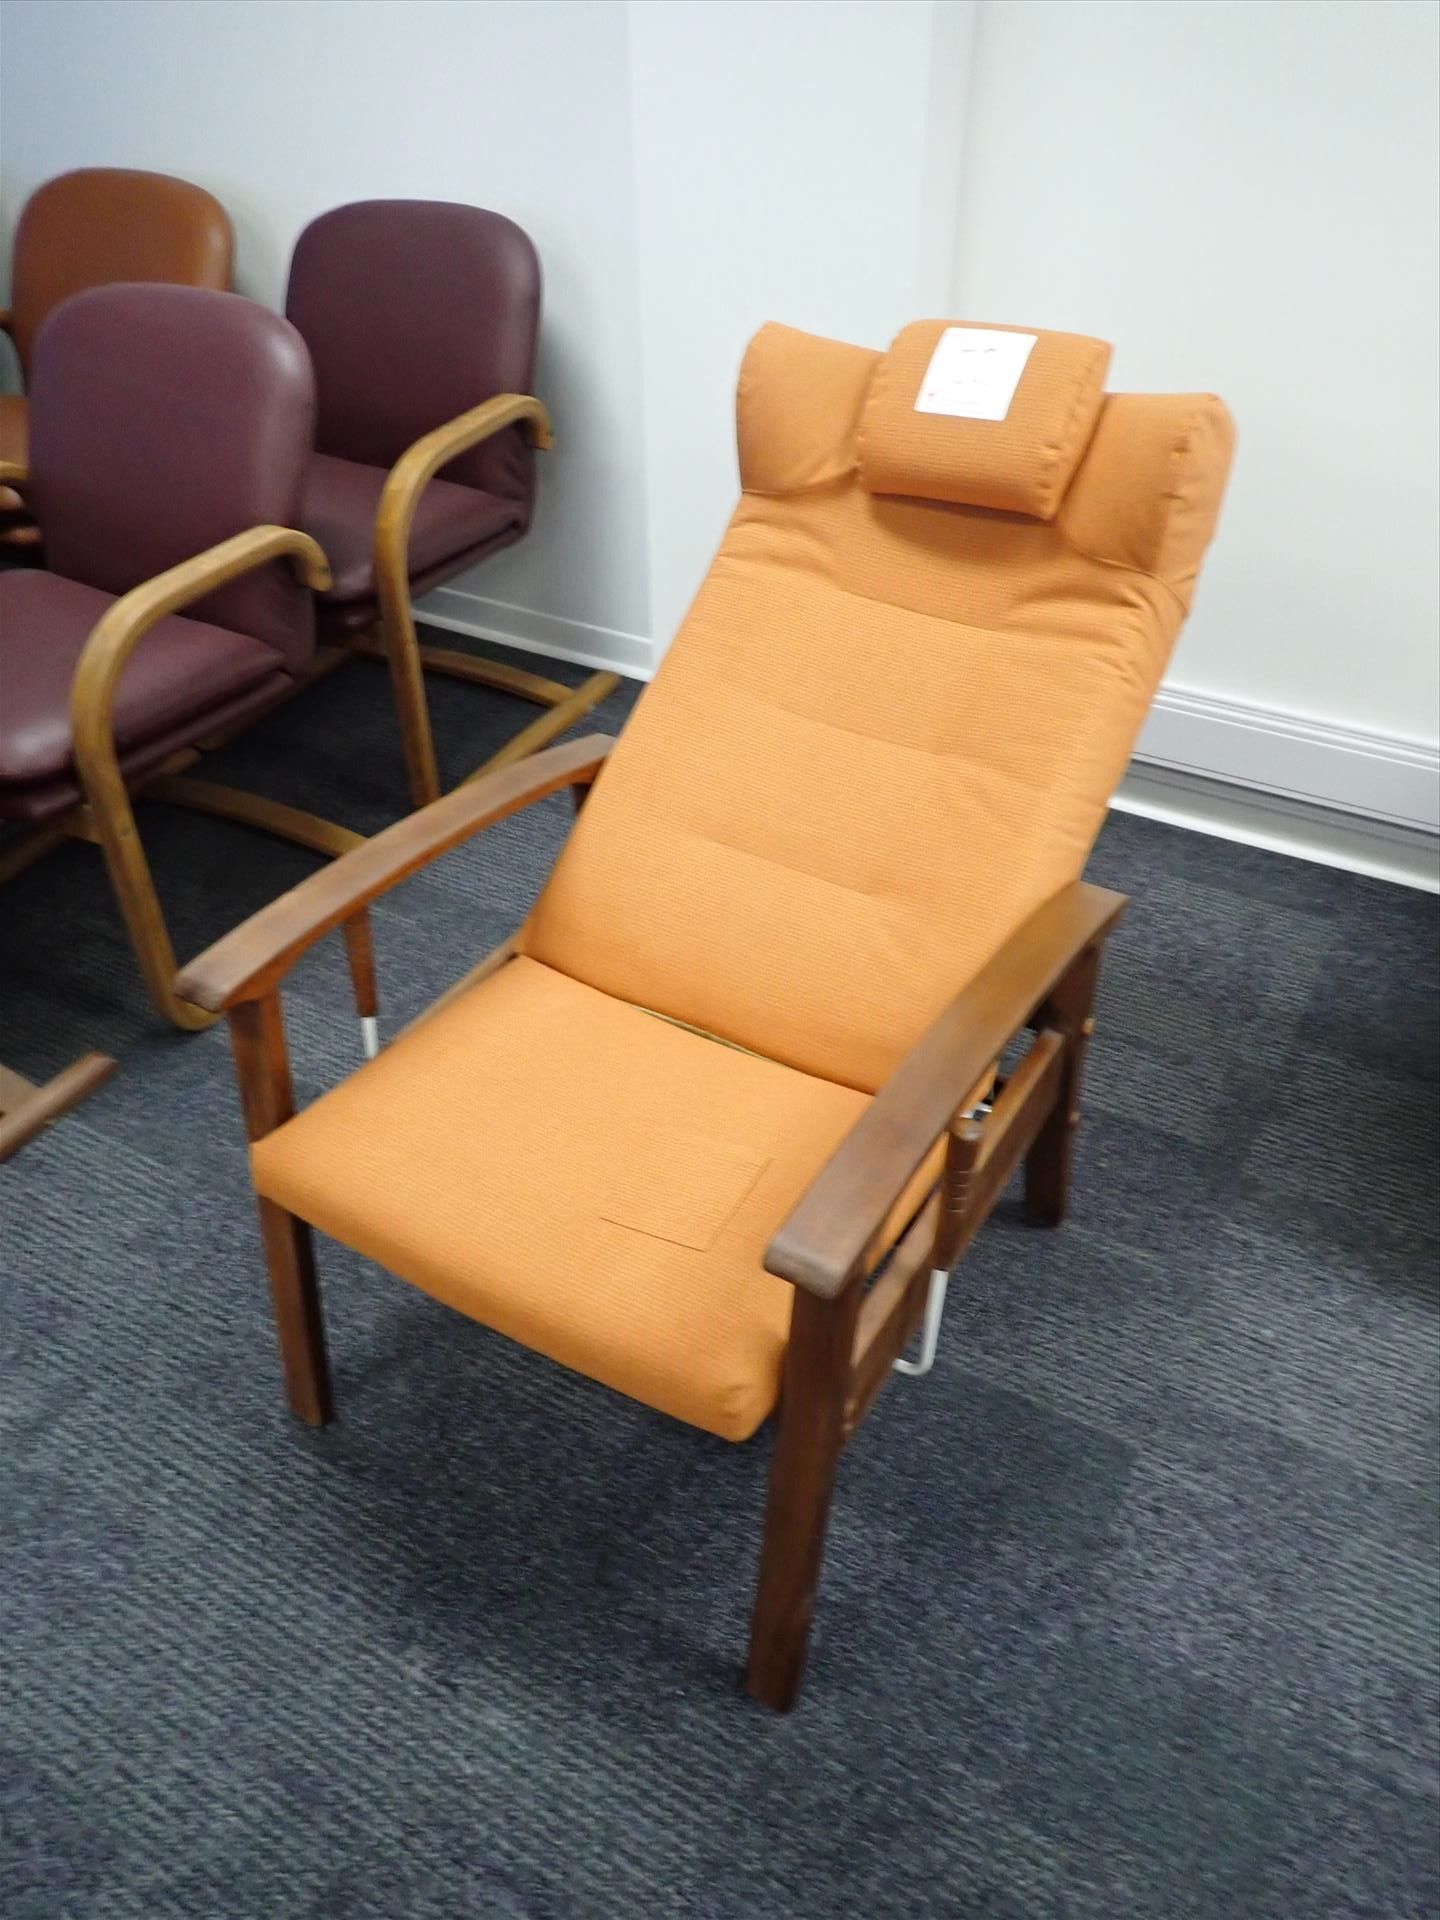 Clipper back-recliner, gas-cylinder, head-rest, assistance-bar, dual-hand levers, stain-resistant - Image 2 of 3